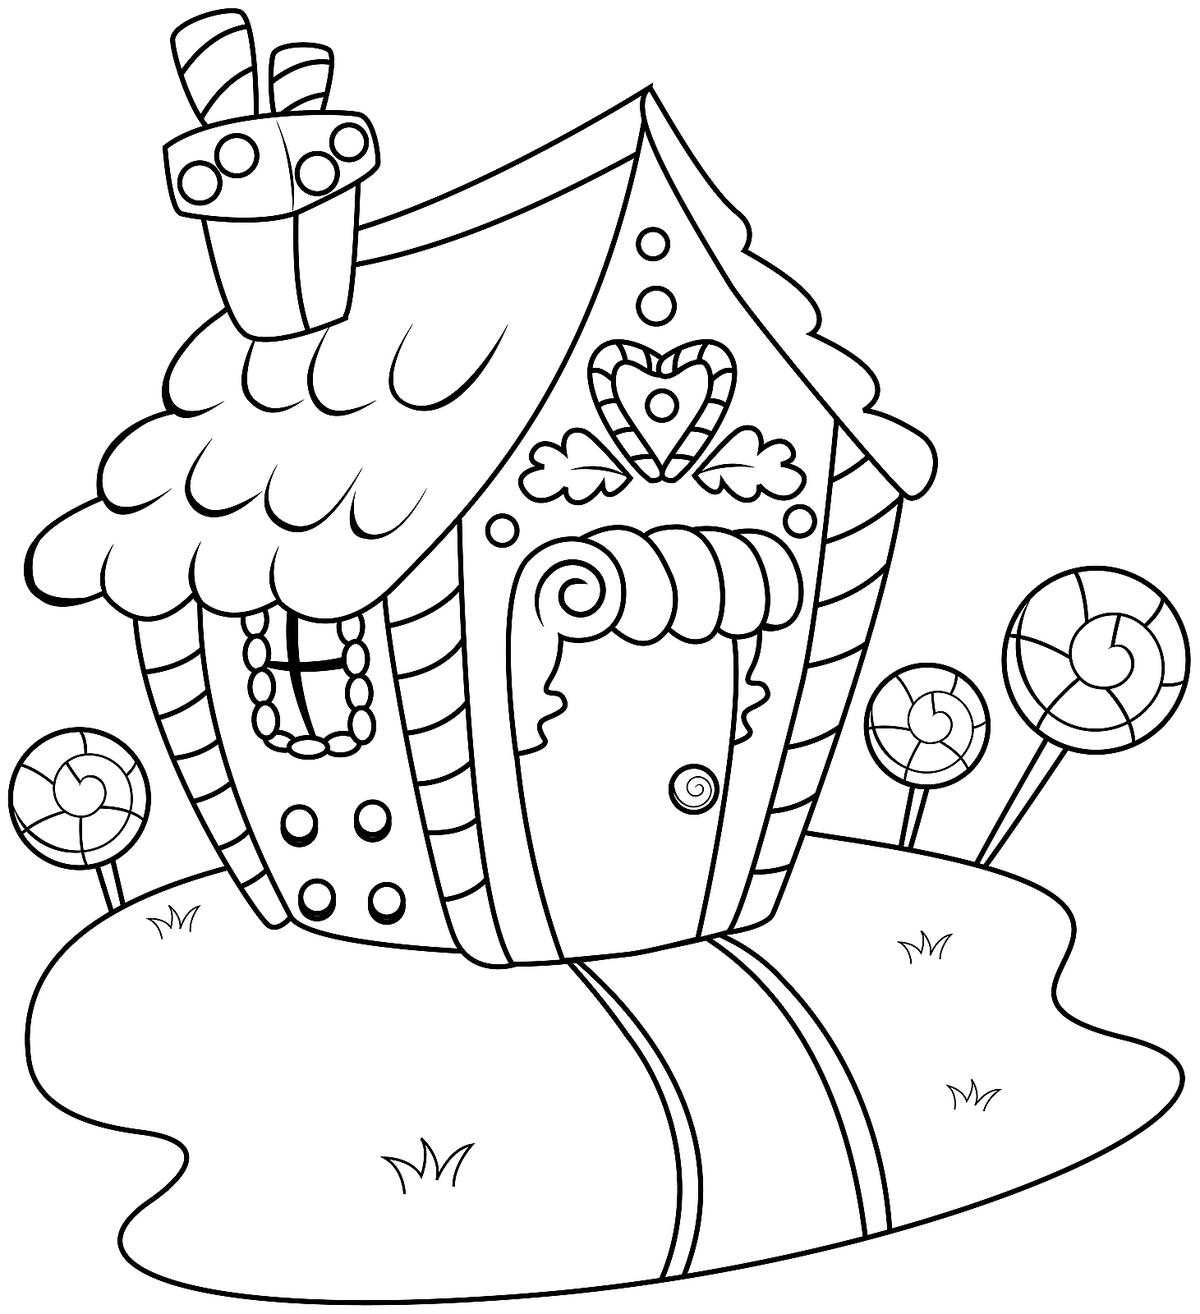 Gingerbread house coloring pages free printable coloring activity game pages for the holidays printables mom